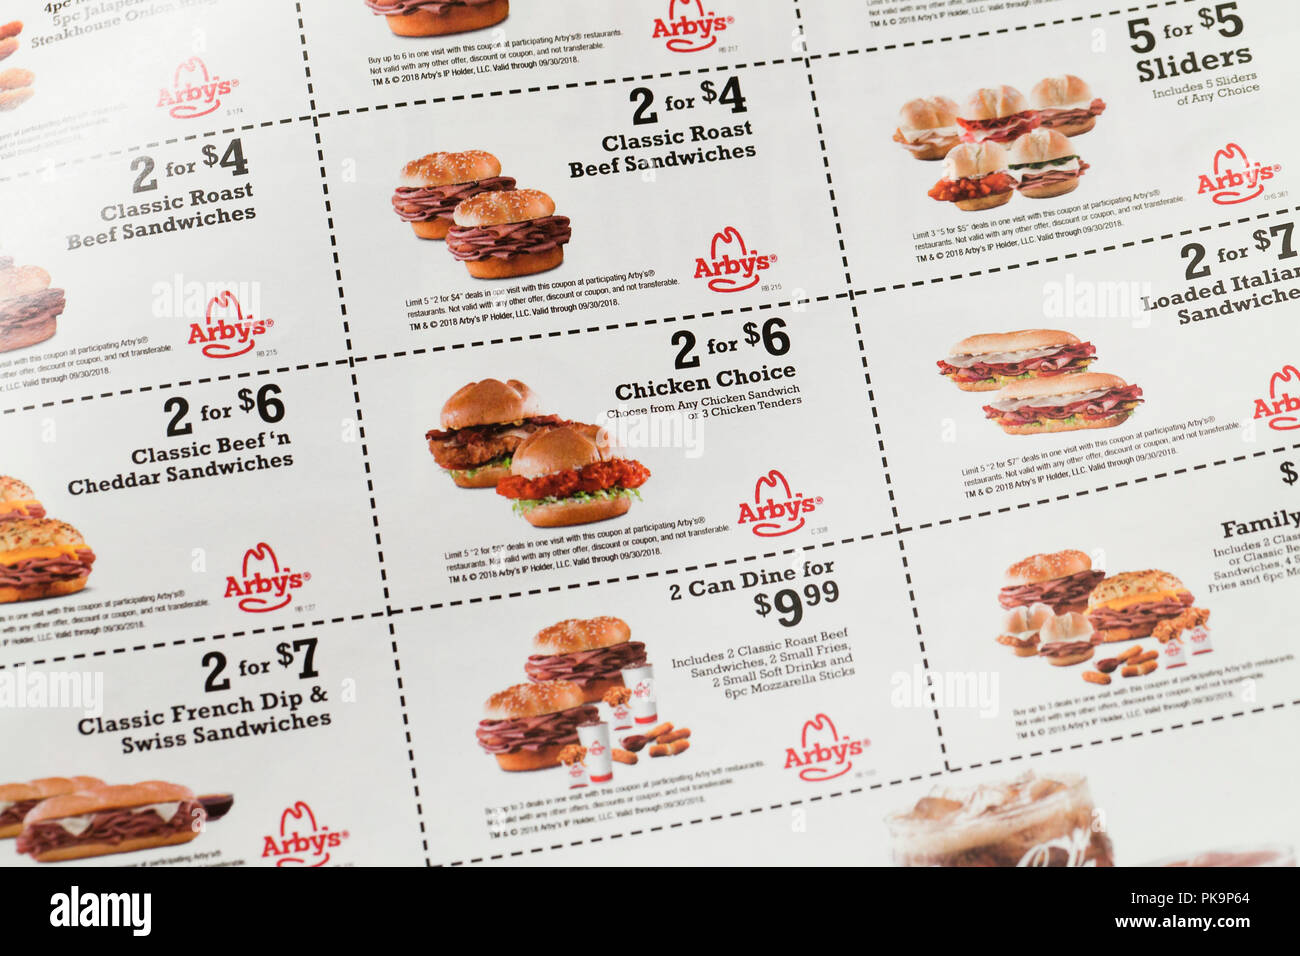 Arby's Sandwich Coupons (Fast food Coupon) - USA Stockfoto